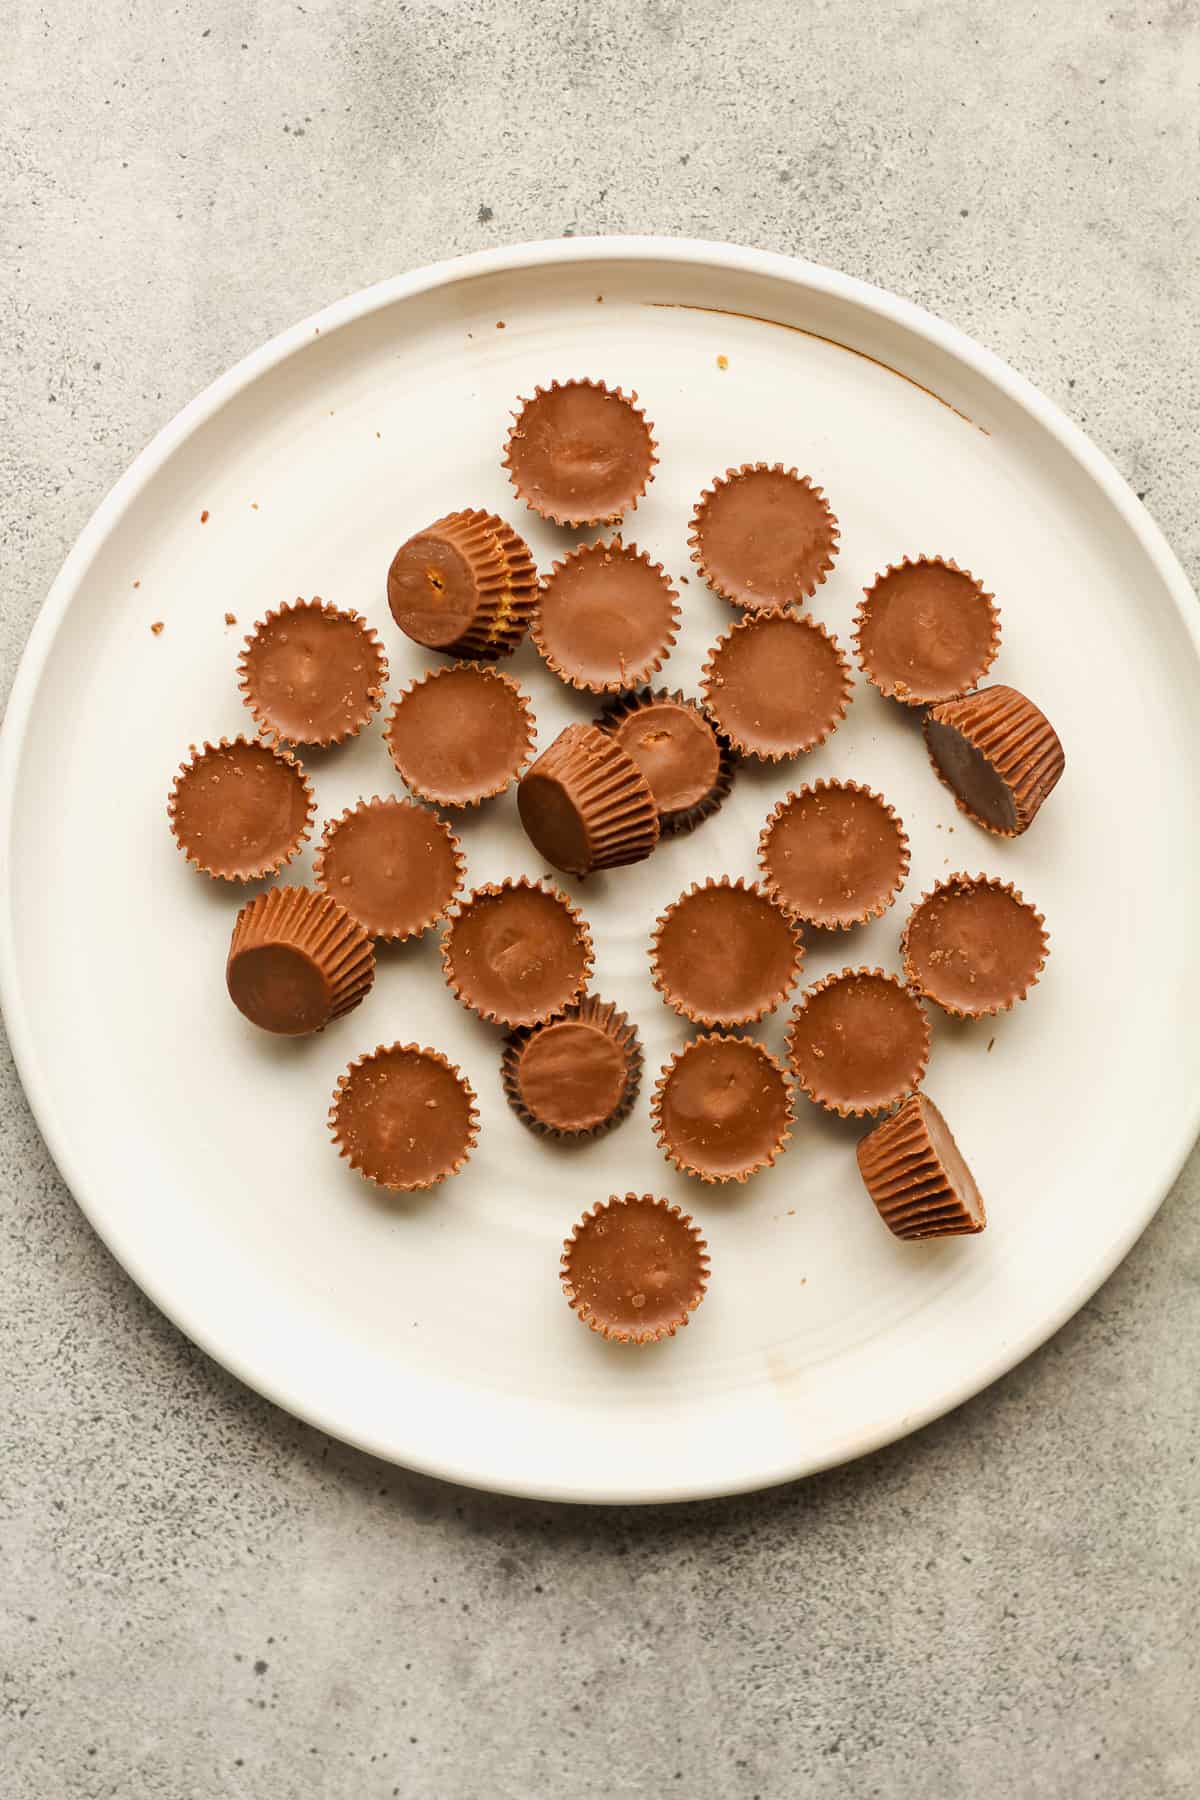 A plate of mini Reese's peanut butter cups.